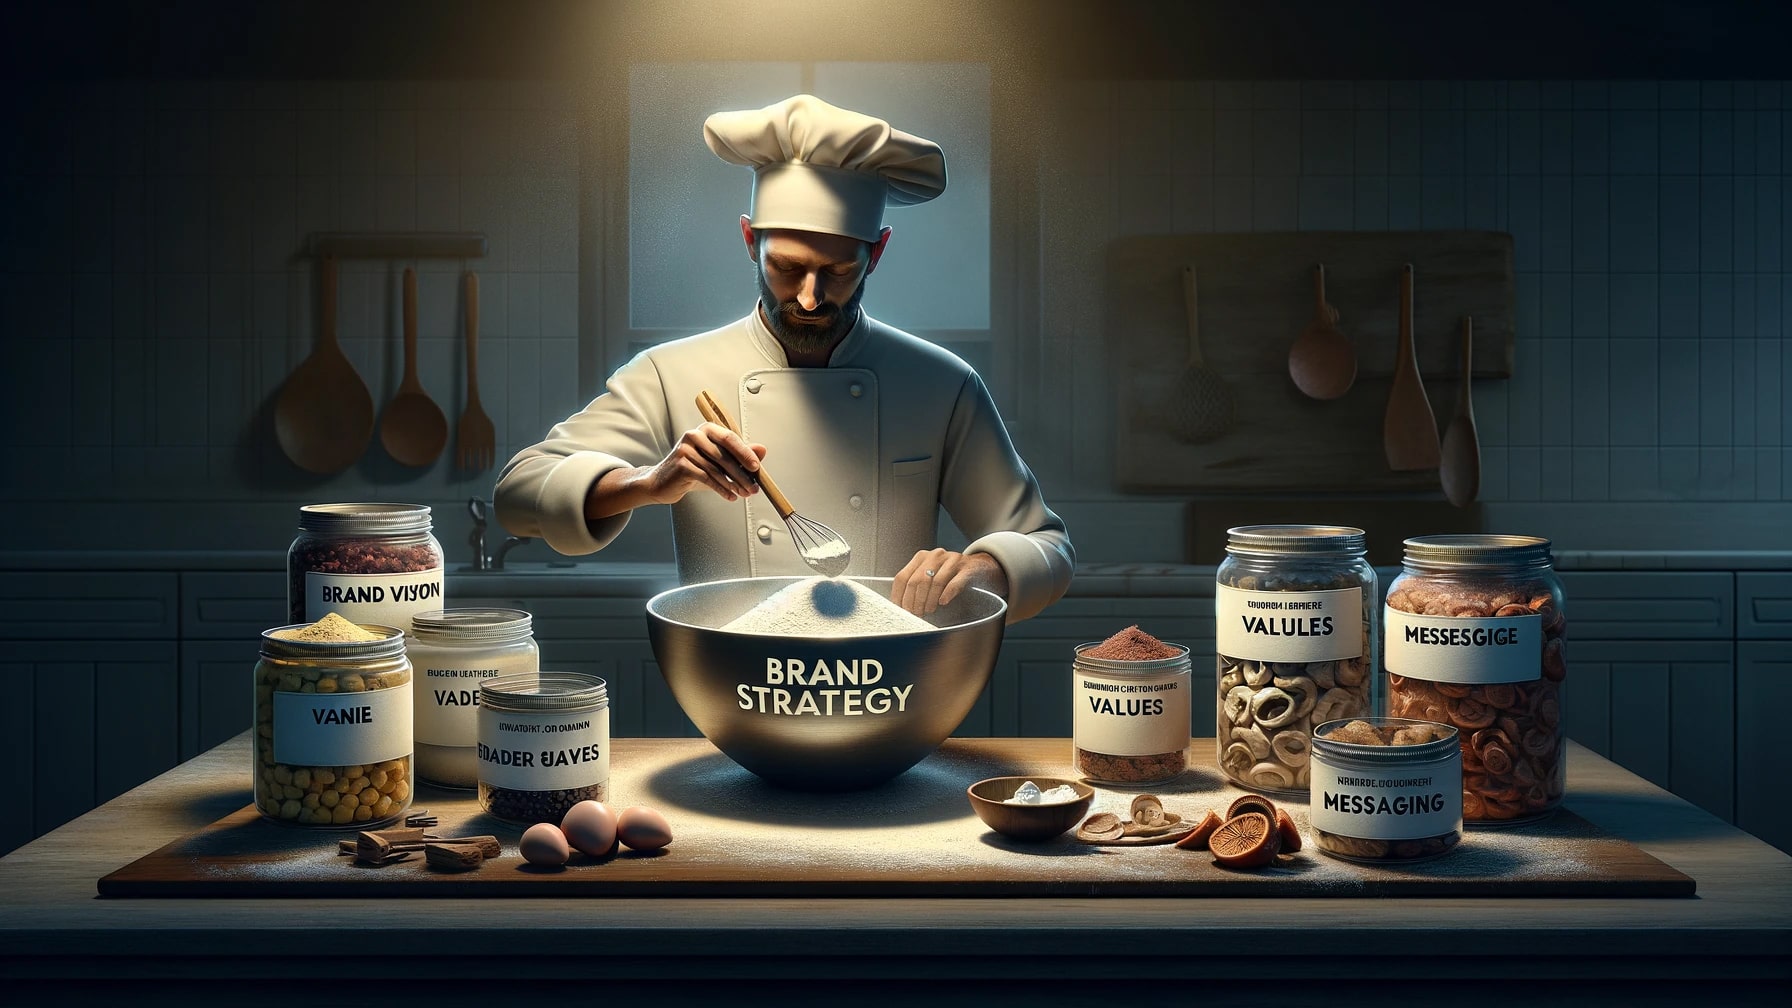 A-chef-carefully-mixing-ingredients-labeled-Brand-Vision-Values-and-Messaging-to-create-a-delicious-Brand-Strategy-min